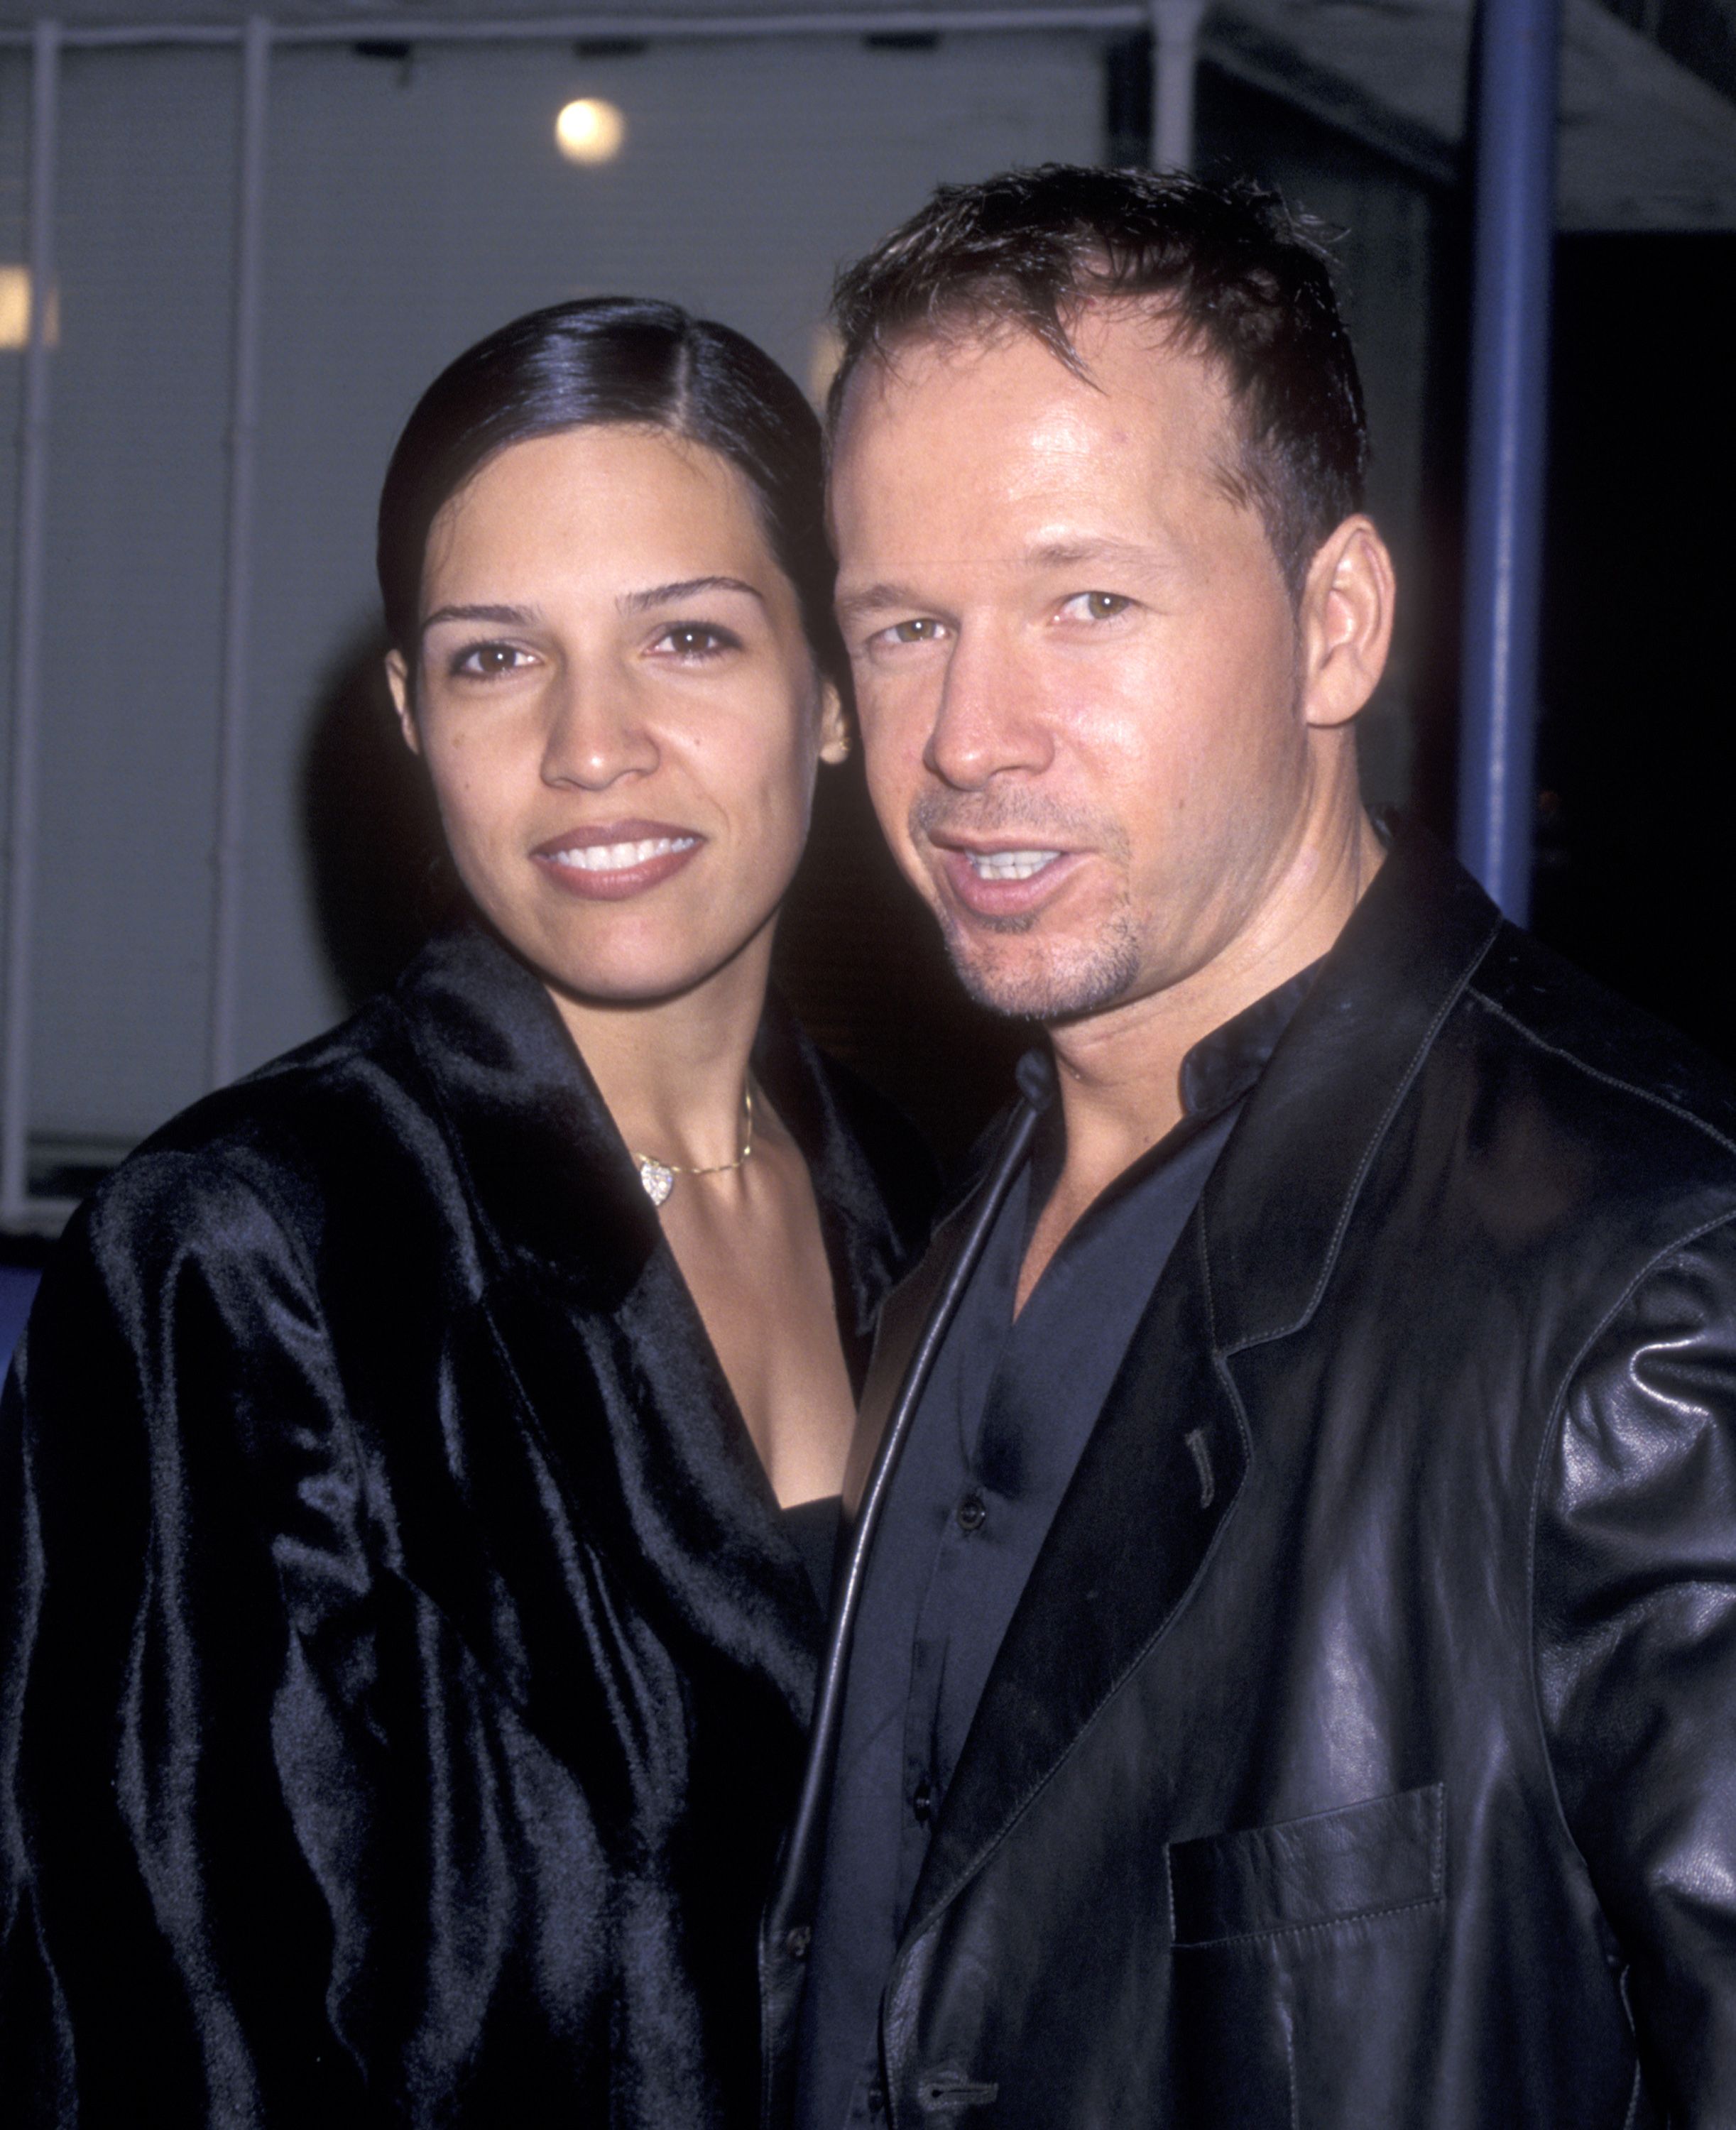 Donnie Wahlberg and Kimberly Fey during the "Three Kings" Westwood Premiere on September 27, 1999 at Mann Village Theatre in Westwood, California. | Source: Getty Images